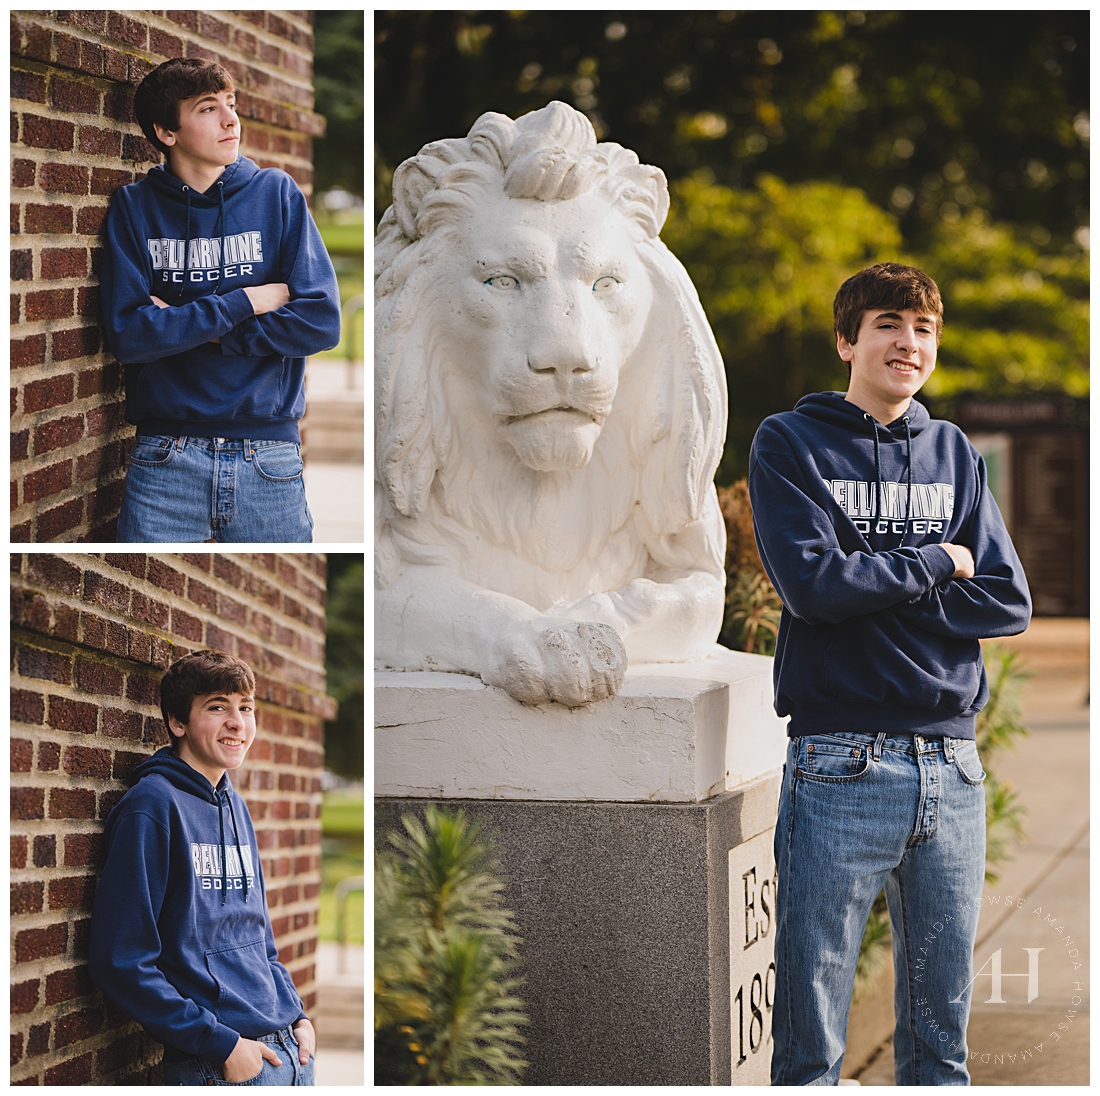 Outdoor Senior Session with Brick Background and Park Statue | Cool Weather Outfit Ideas For Senior Guys | Photographed by the Best Tacoma, Washington Senior Photographer Amanda Howse Photography